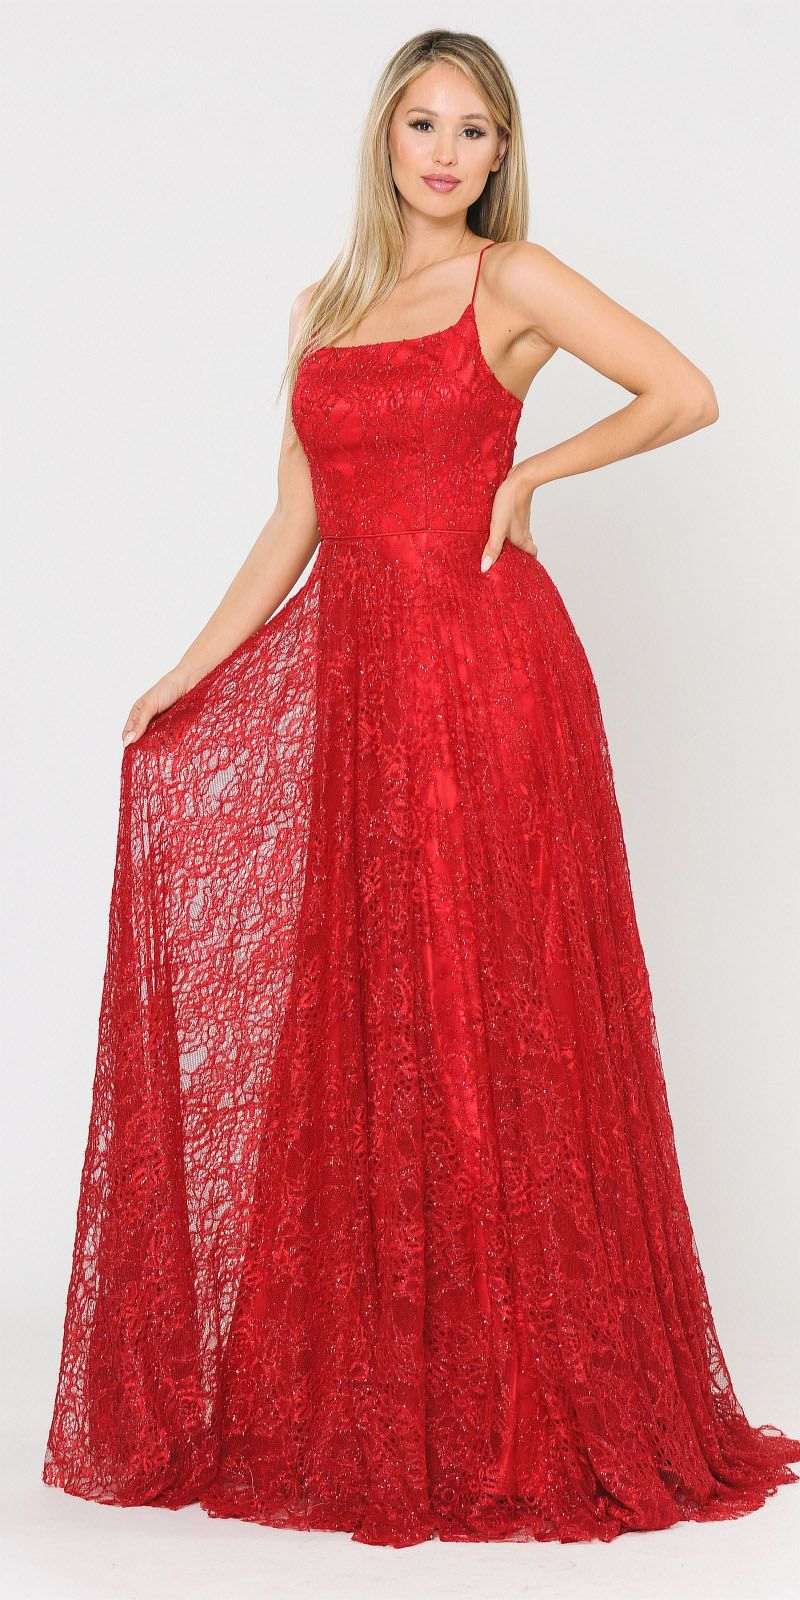 Lace-Up Back A-Line Metallic Lace Long Prom Dress Red